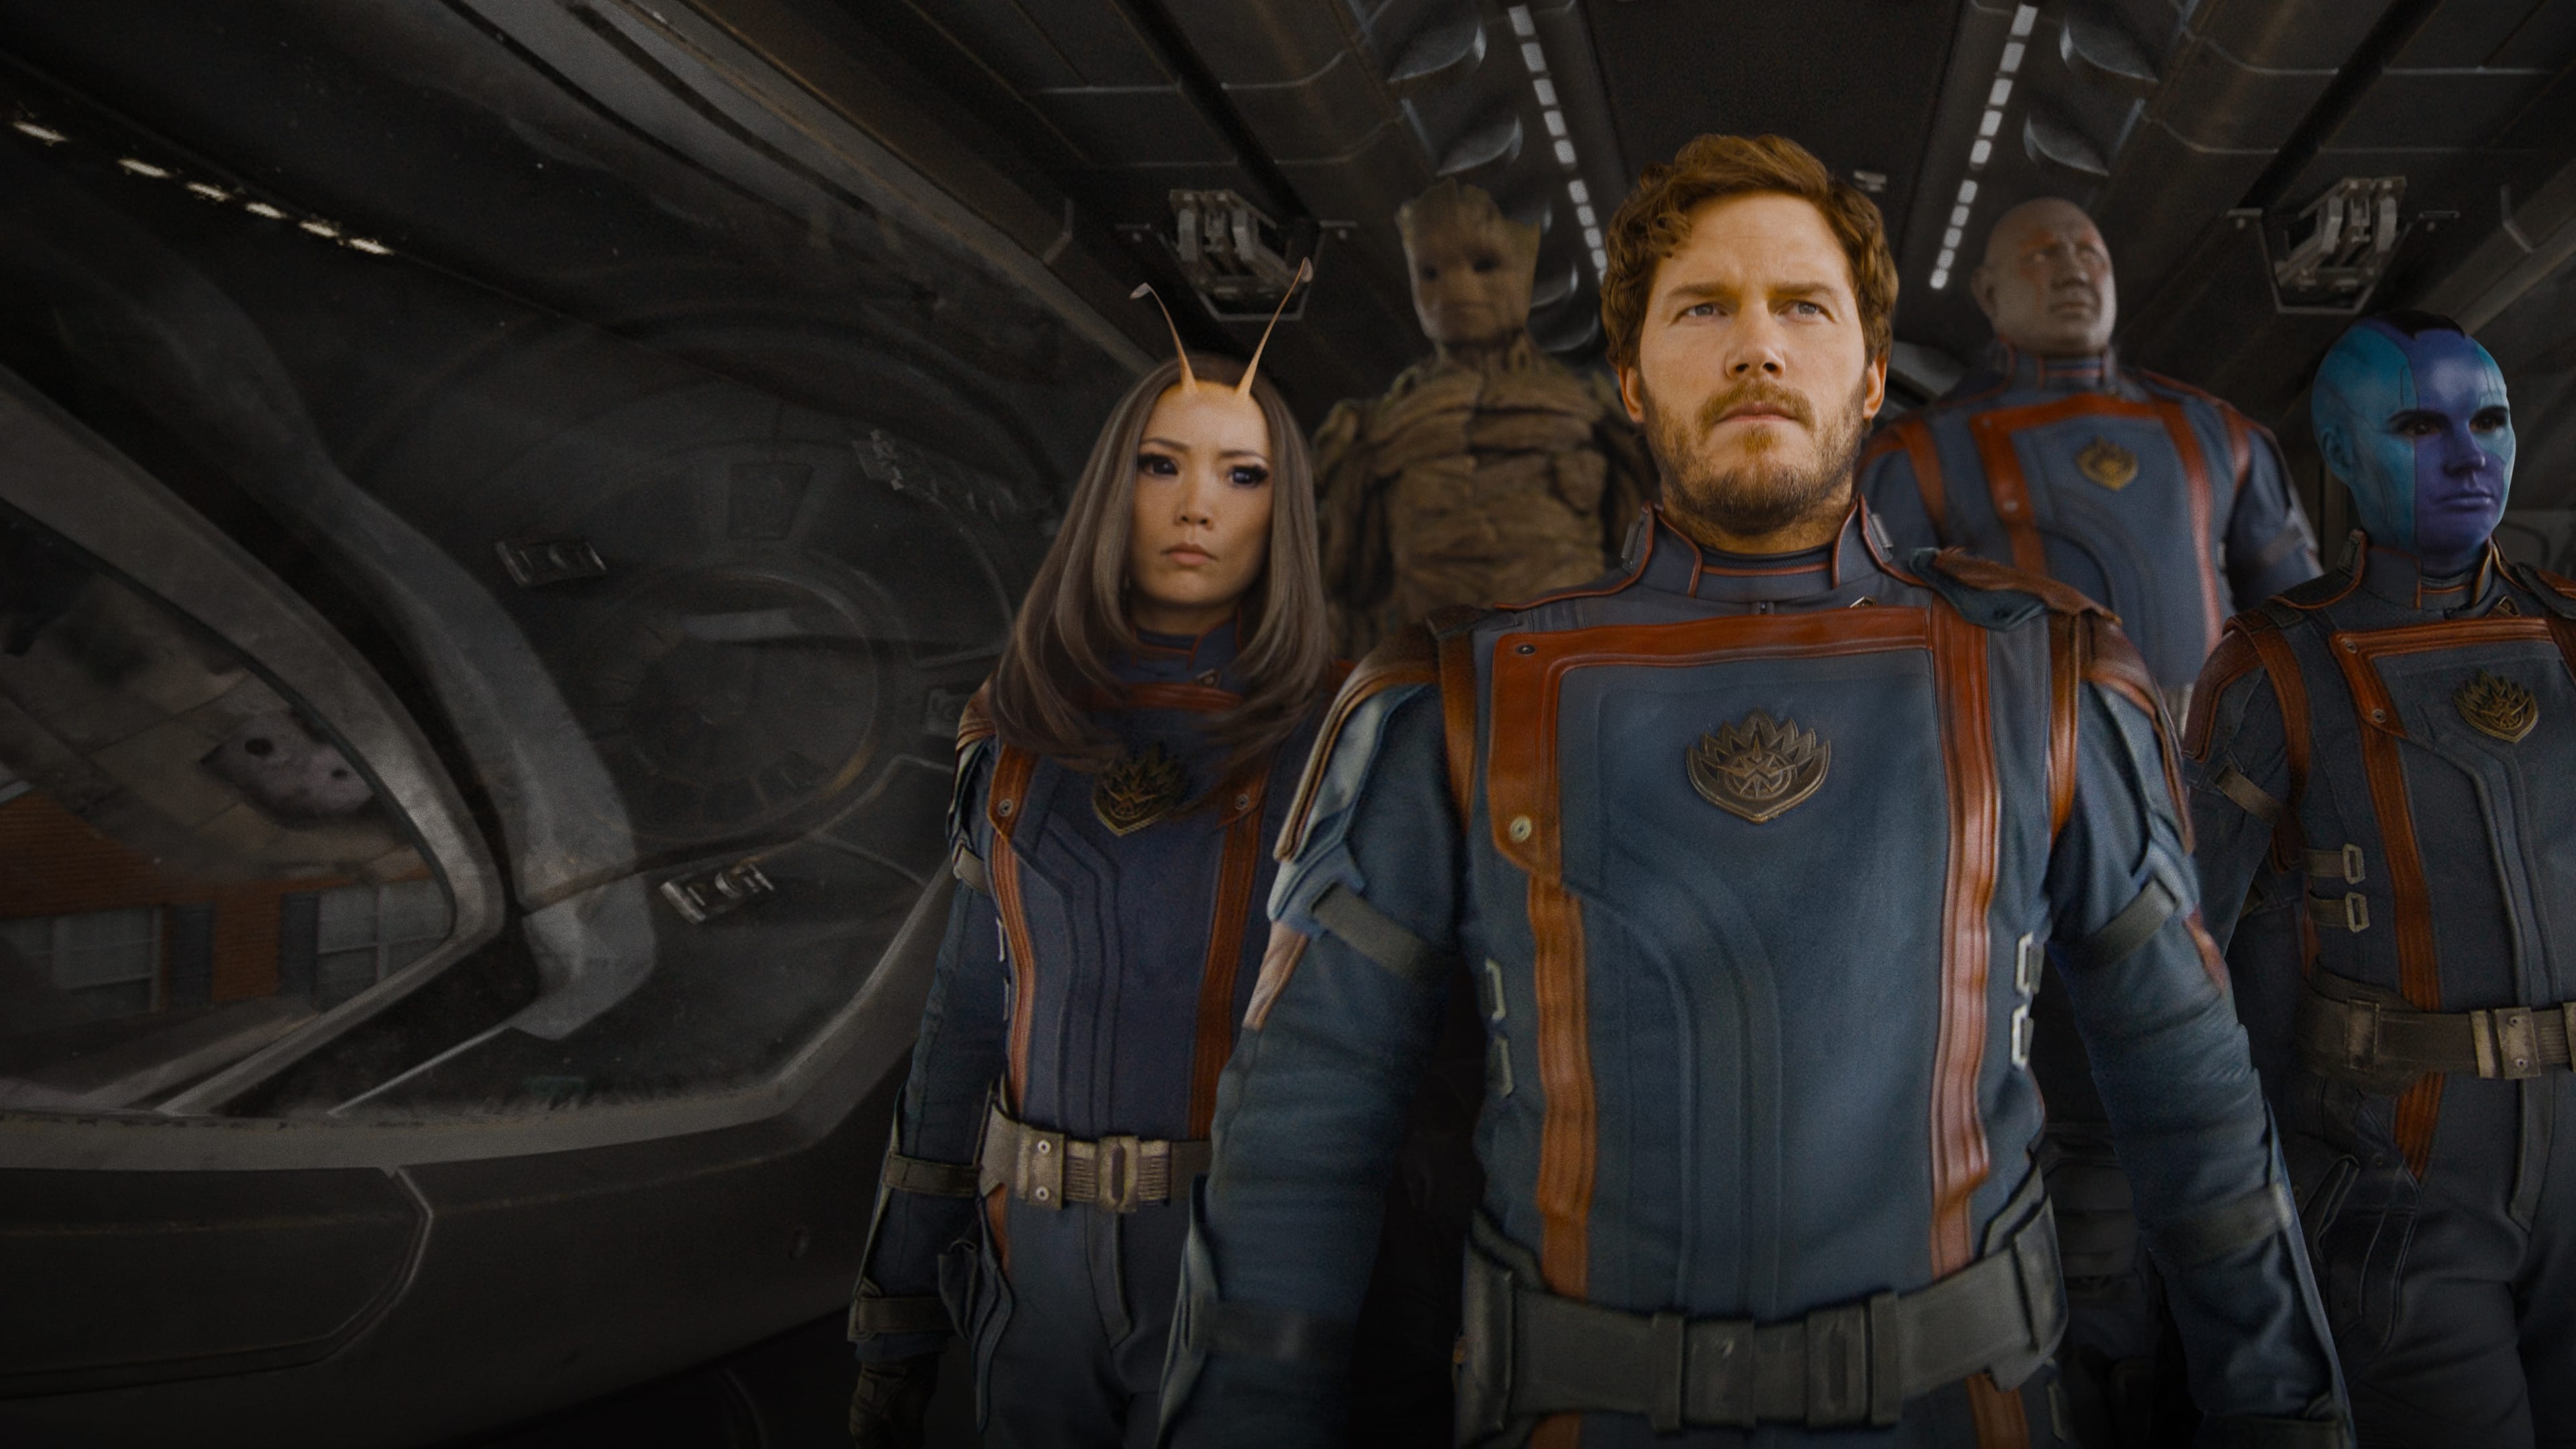 Peter Quill with his team of mis-fits in the Guardians of the Galaxy Vol.3